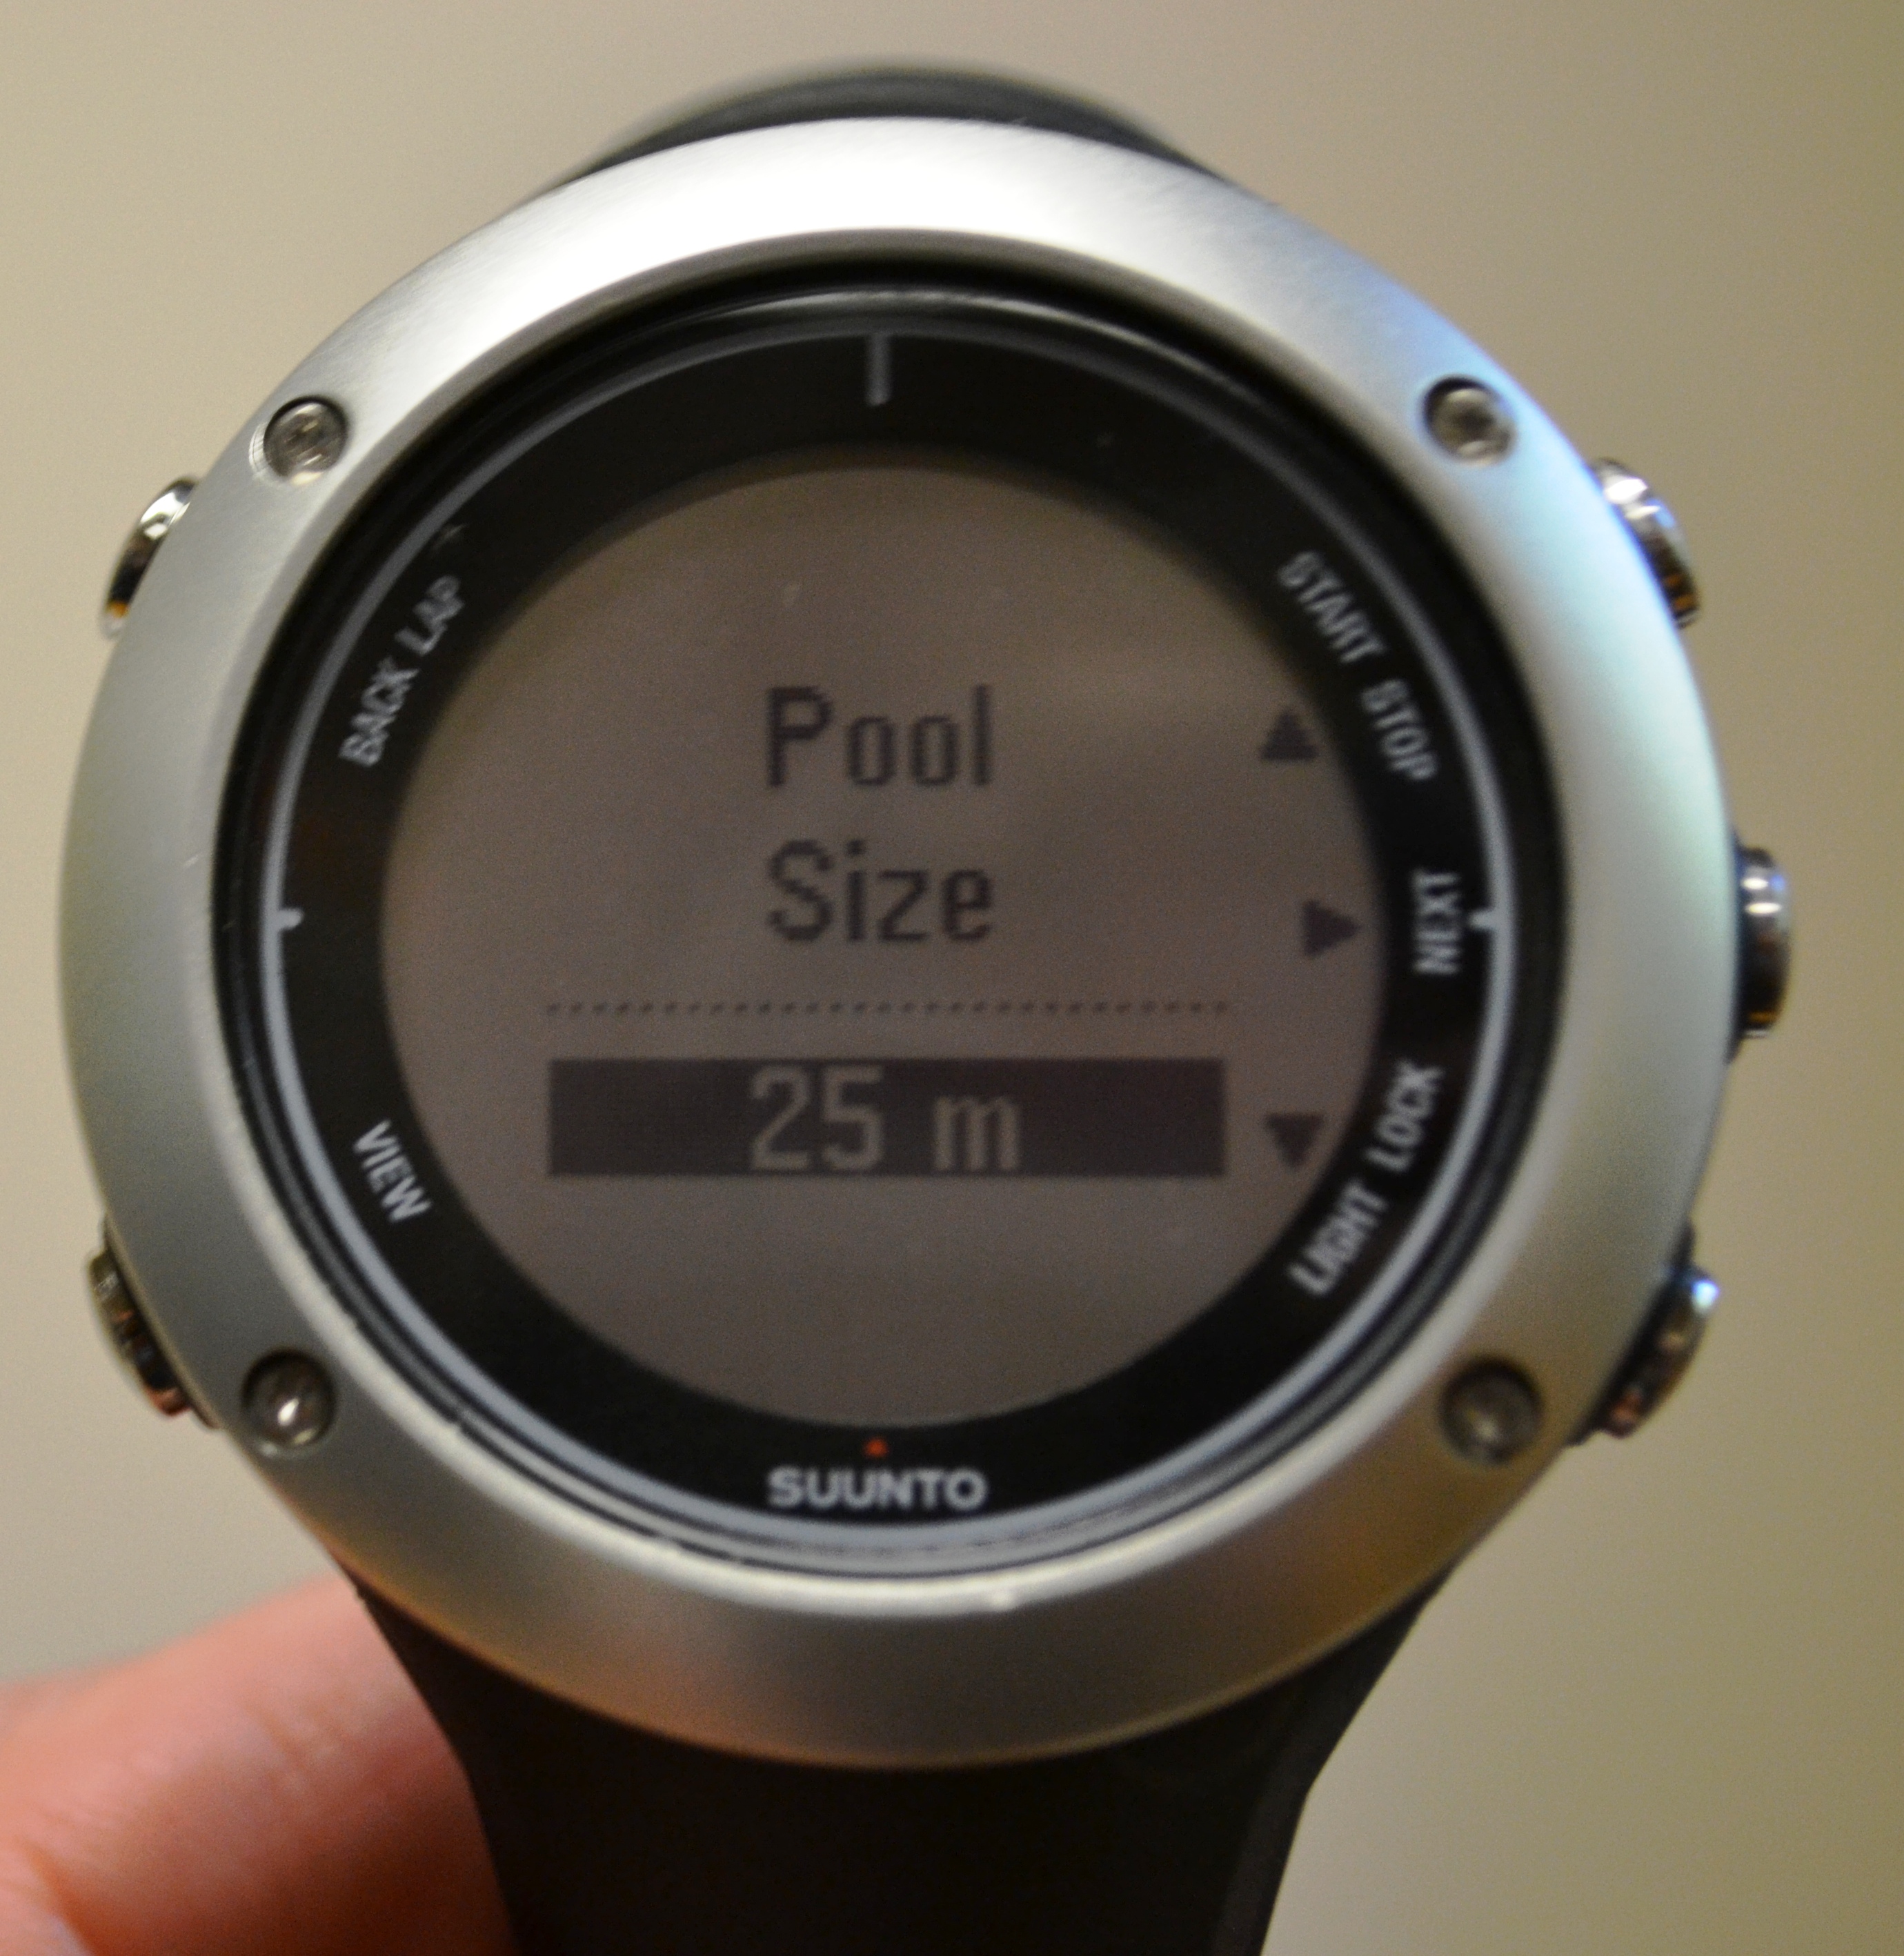 With Suunto Ambit 2S Simply Choose Your Pool Size and Go Swim